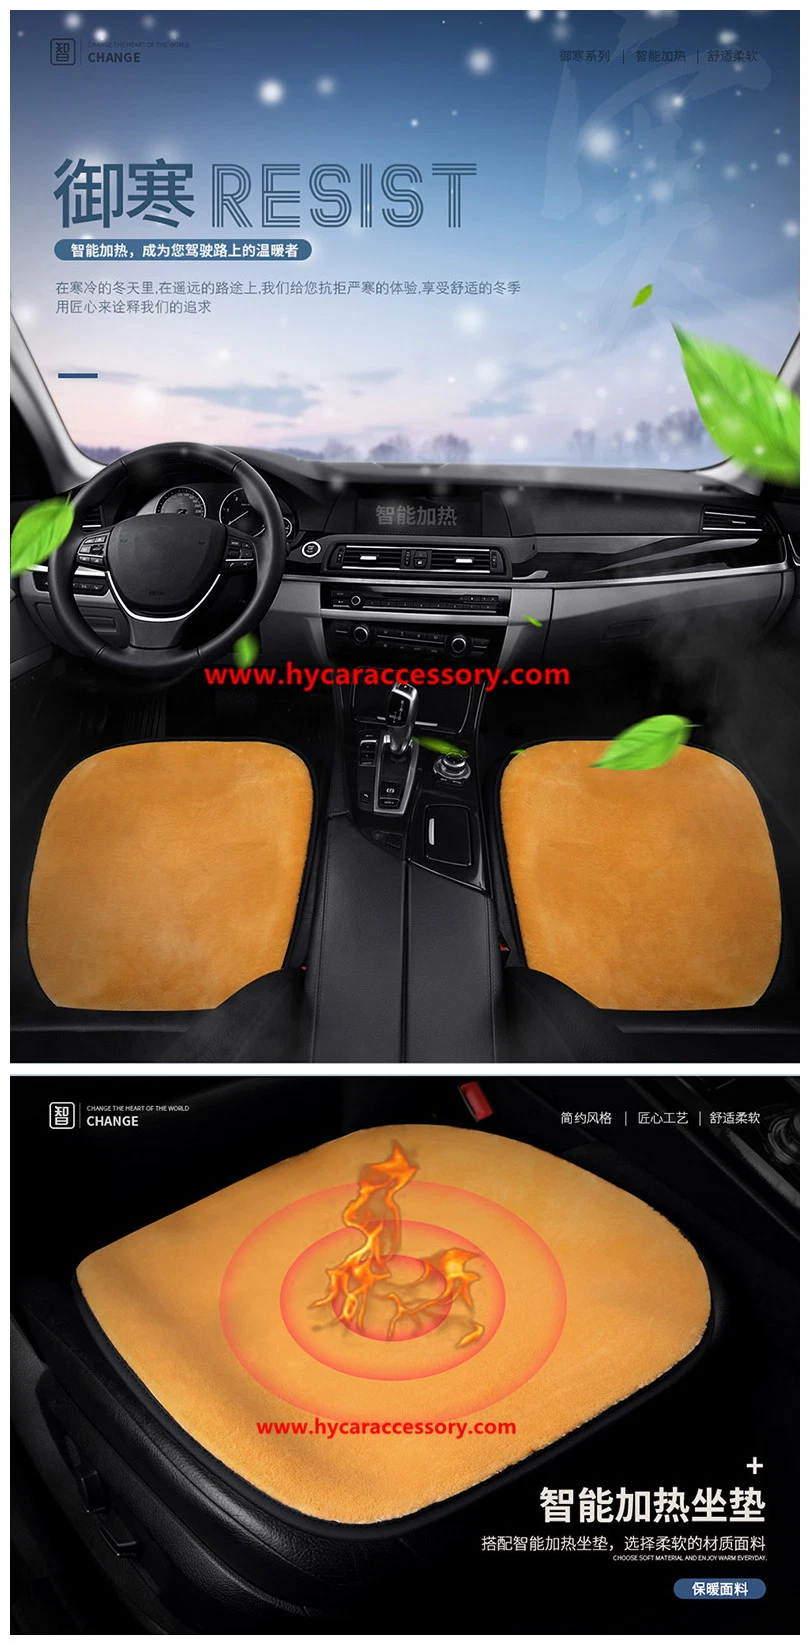 Car Decoration Car Interiorcar Accessory Universal 12V Red Heating Cushion Pad Winter Auto Heated Car Seat Cover